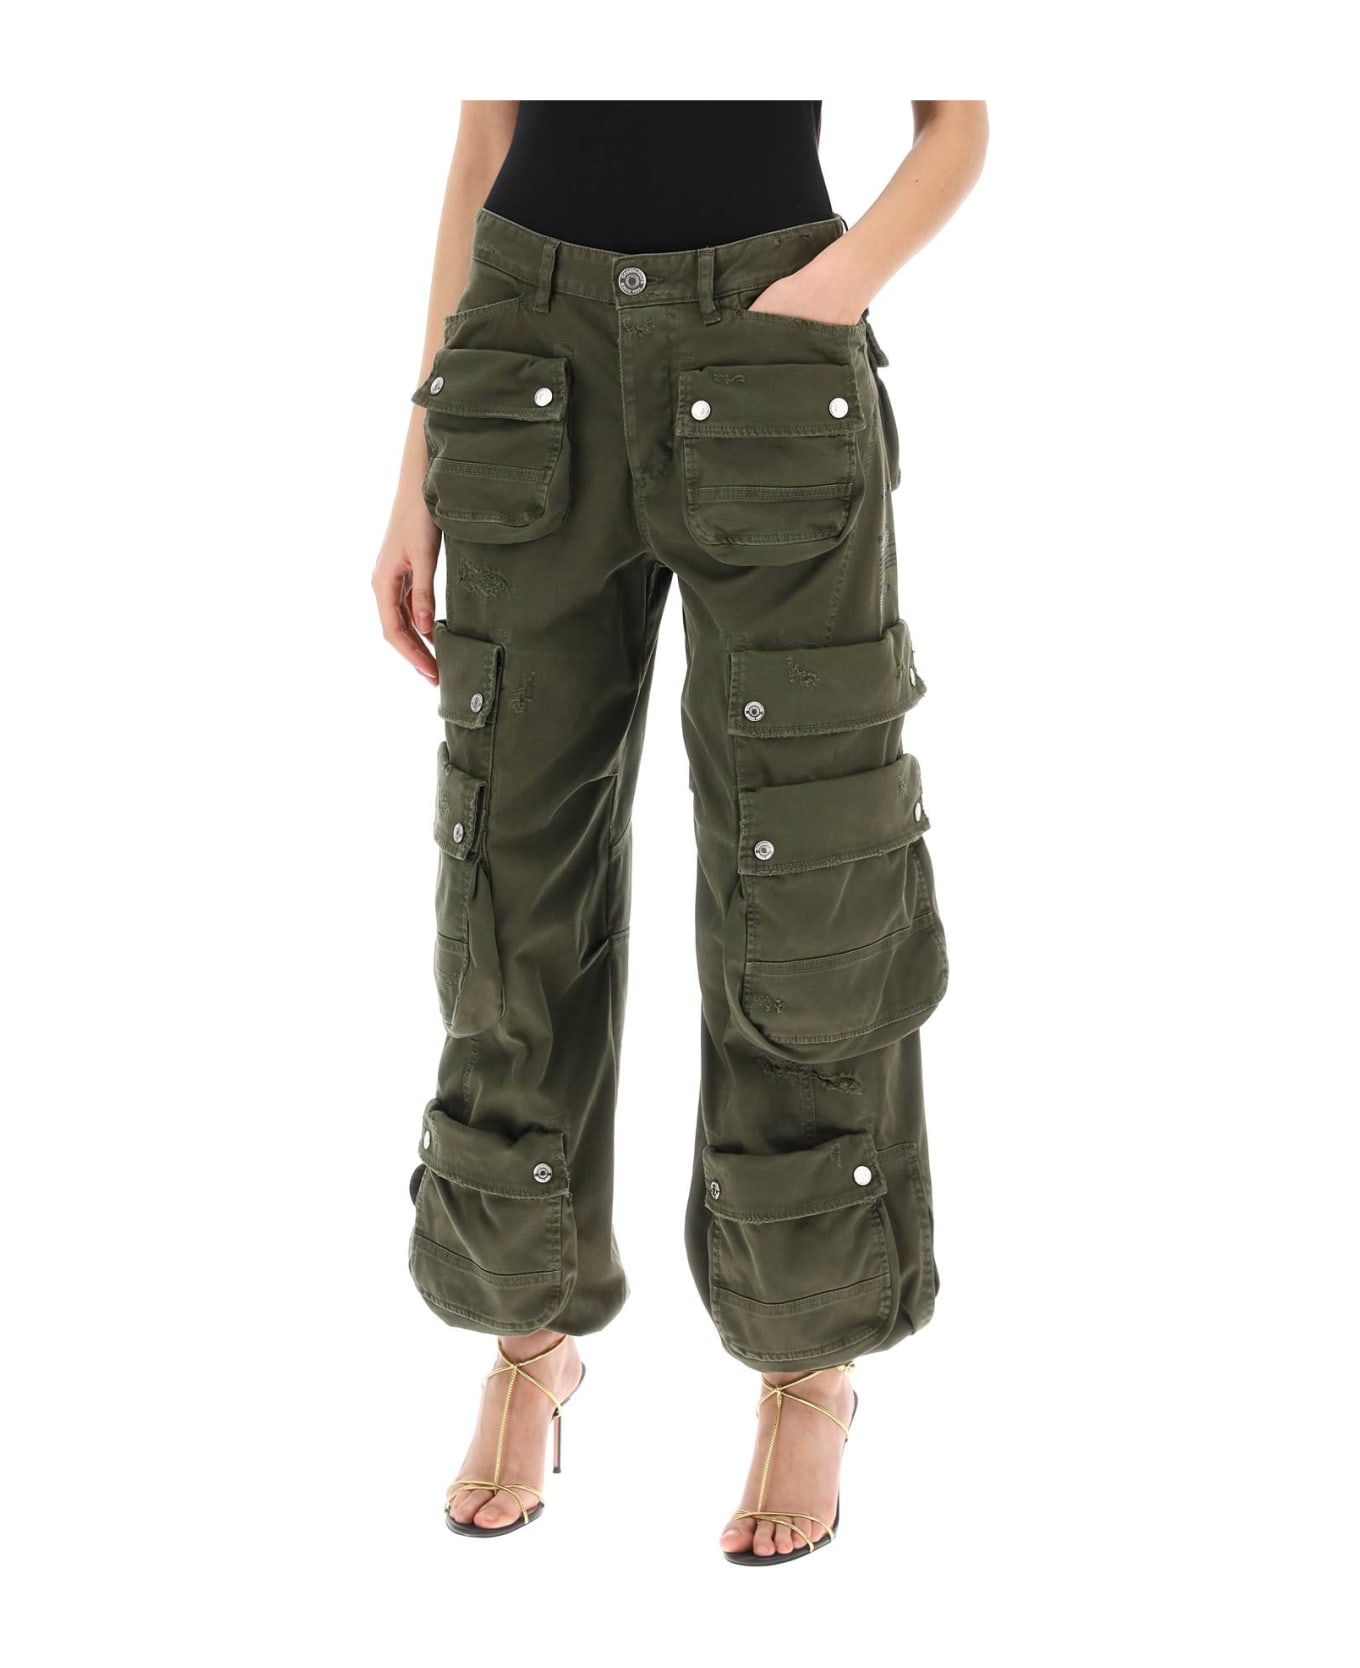 Dsquared2 Pocket Detailed Cargo Pants - MILITARY GREEN (Green) ボトムス